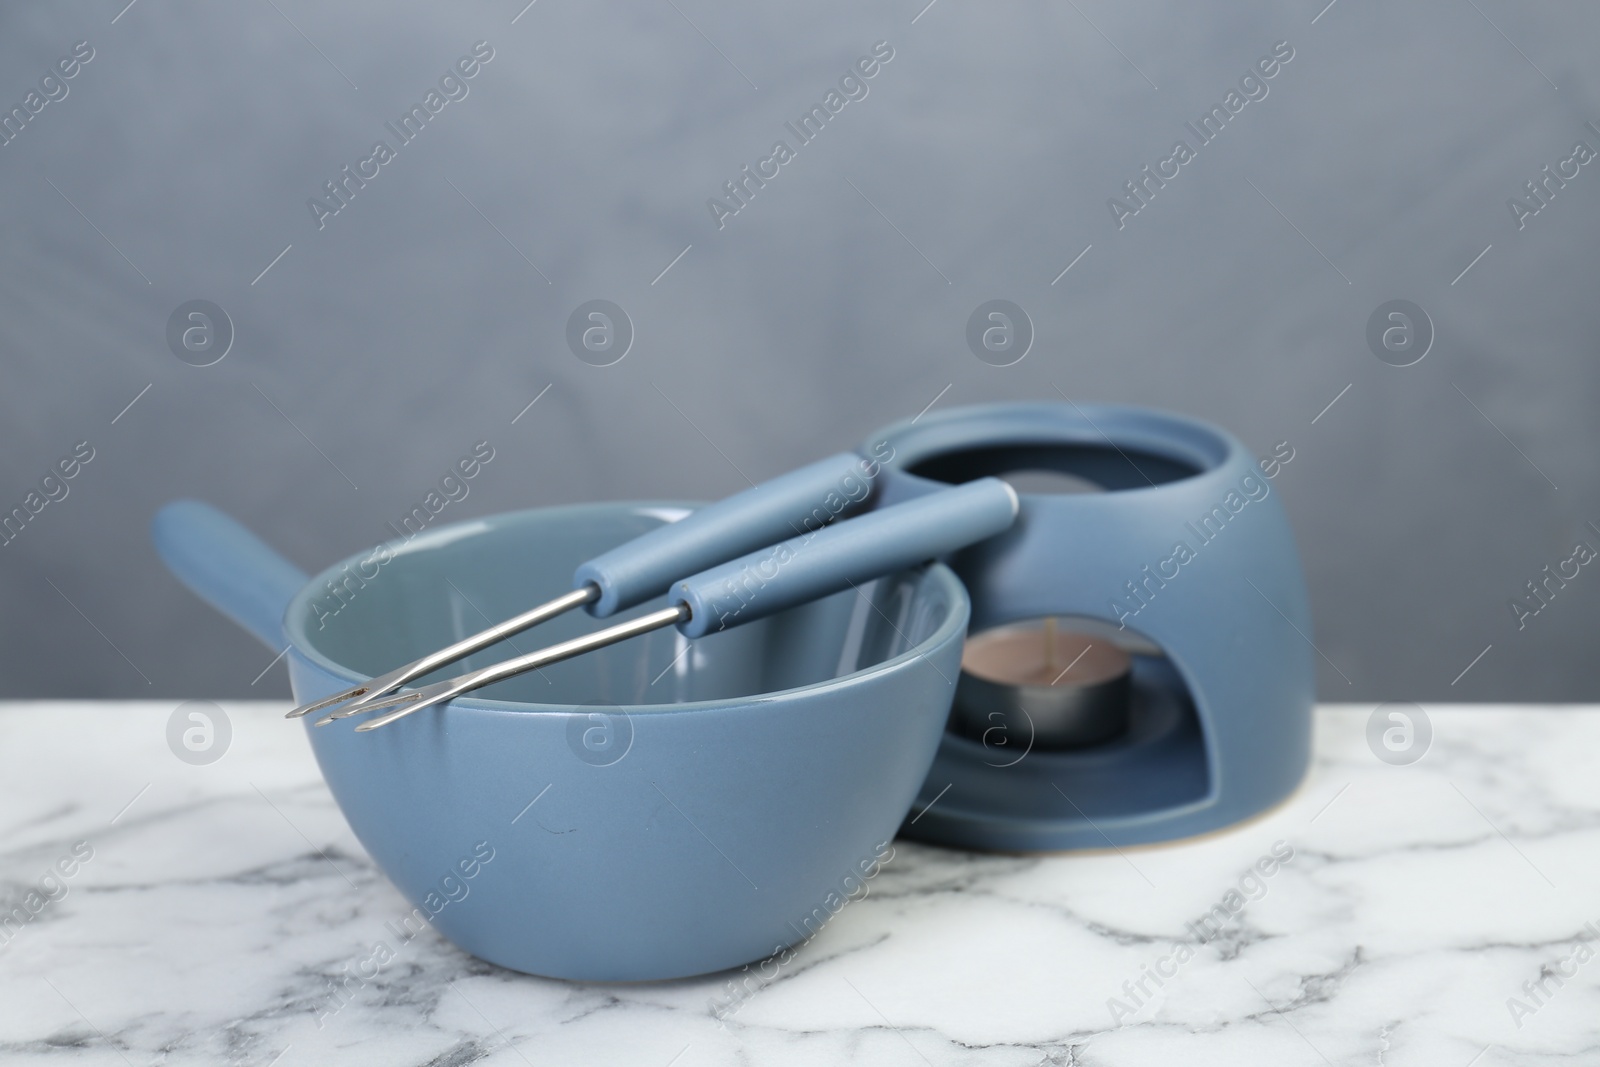 Photo of Fondue set on white marble table against light gray wall